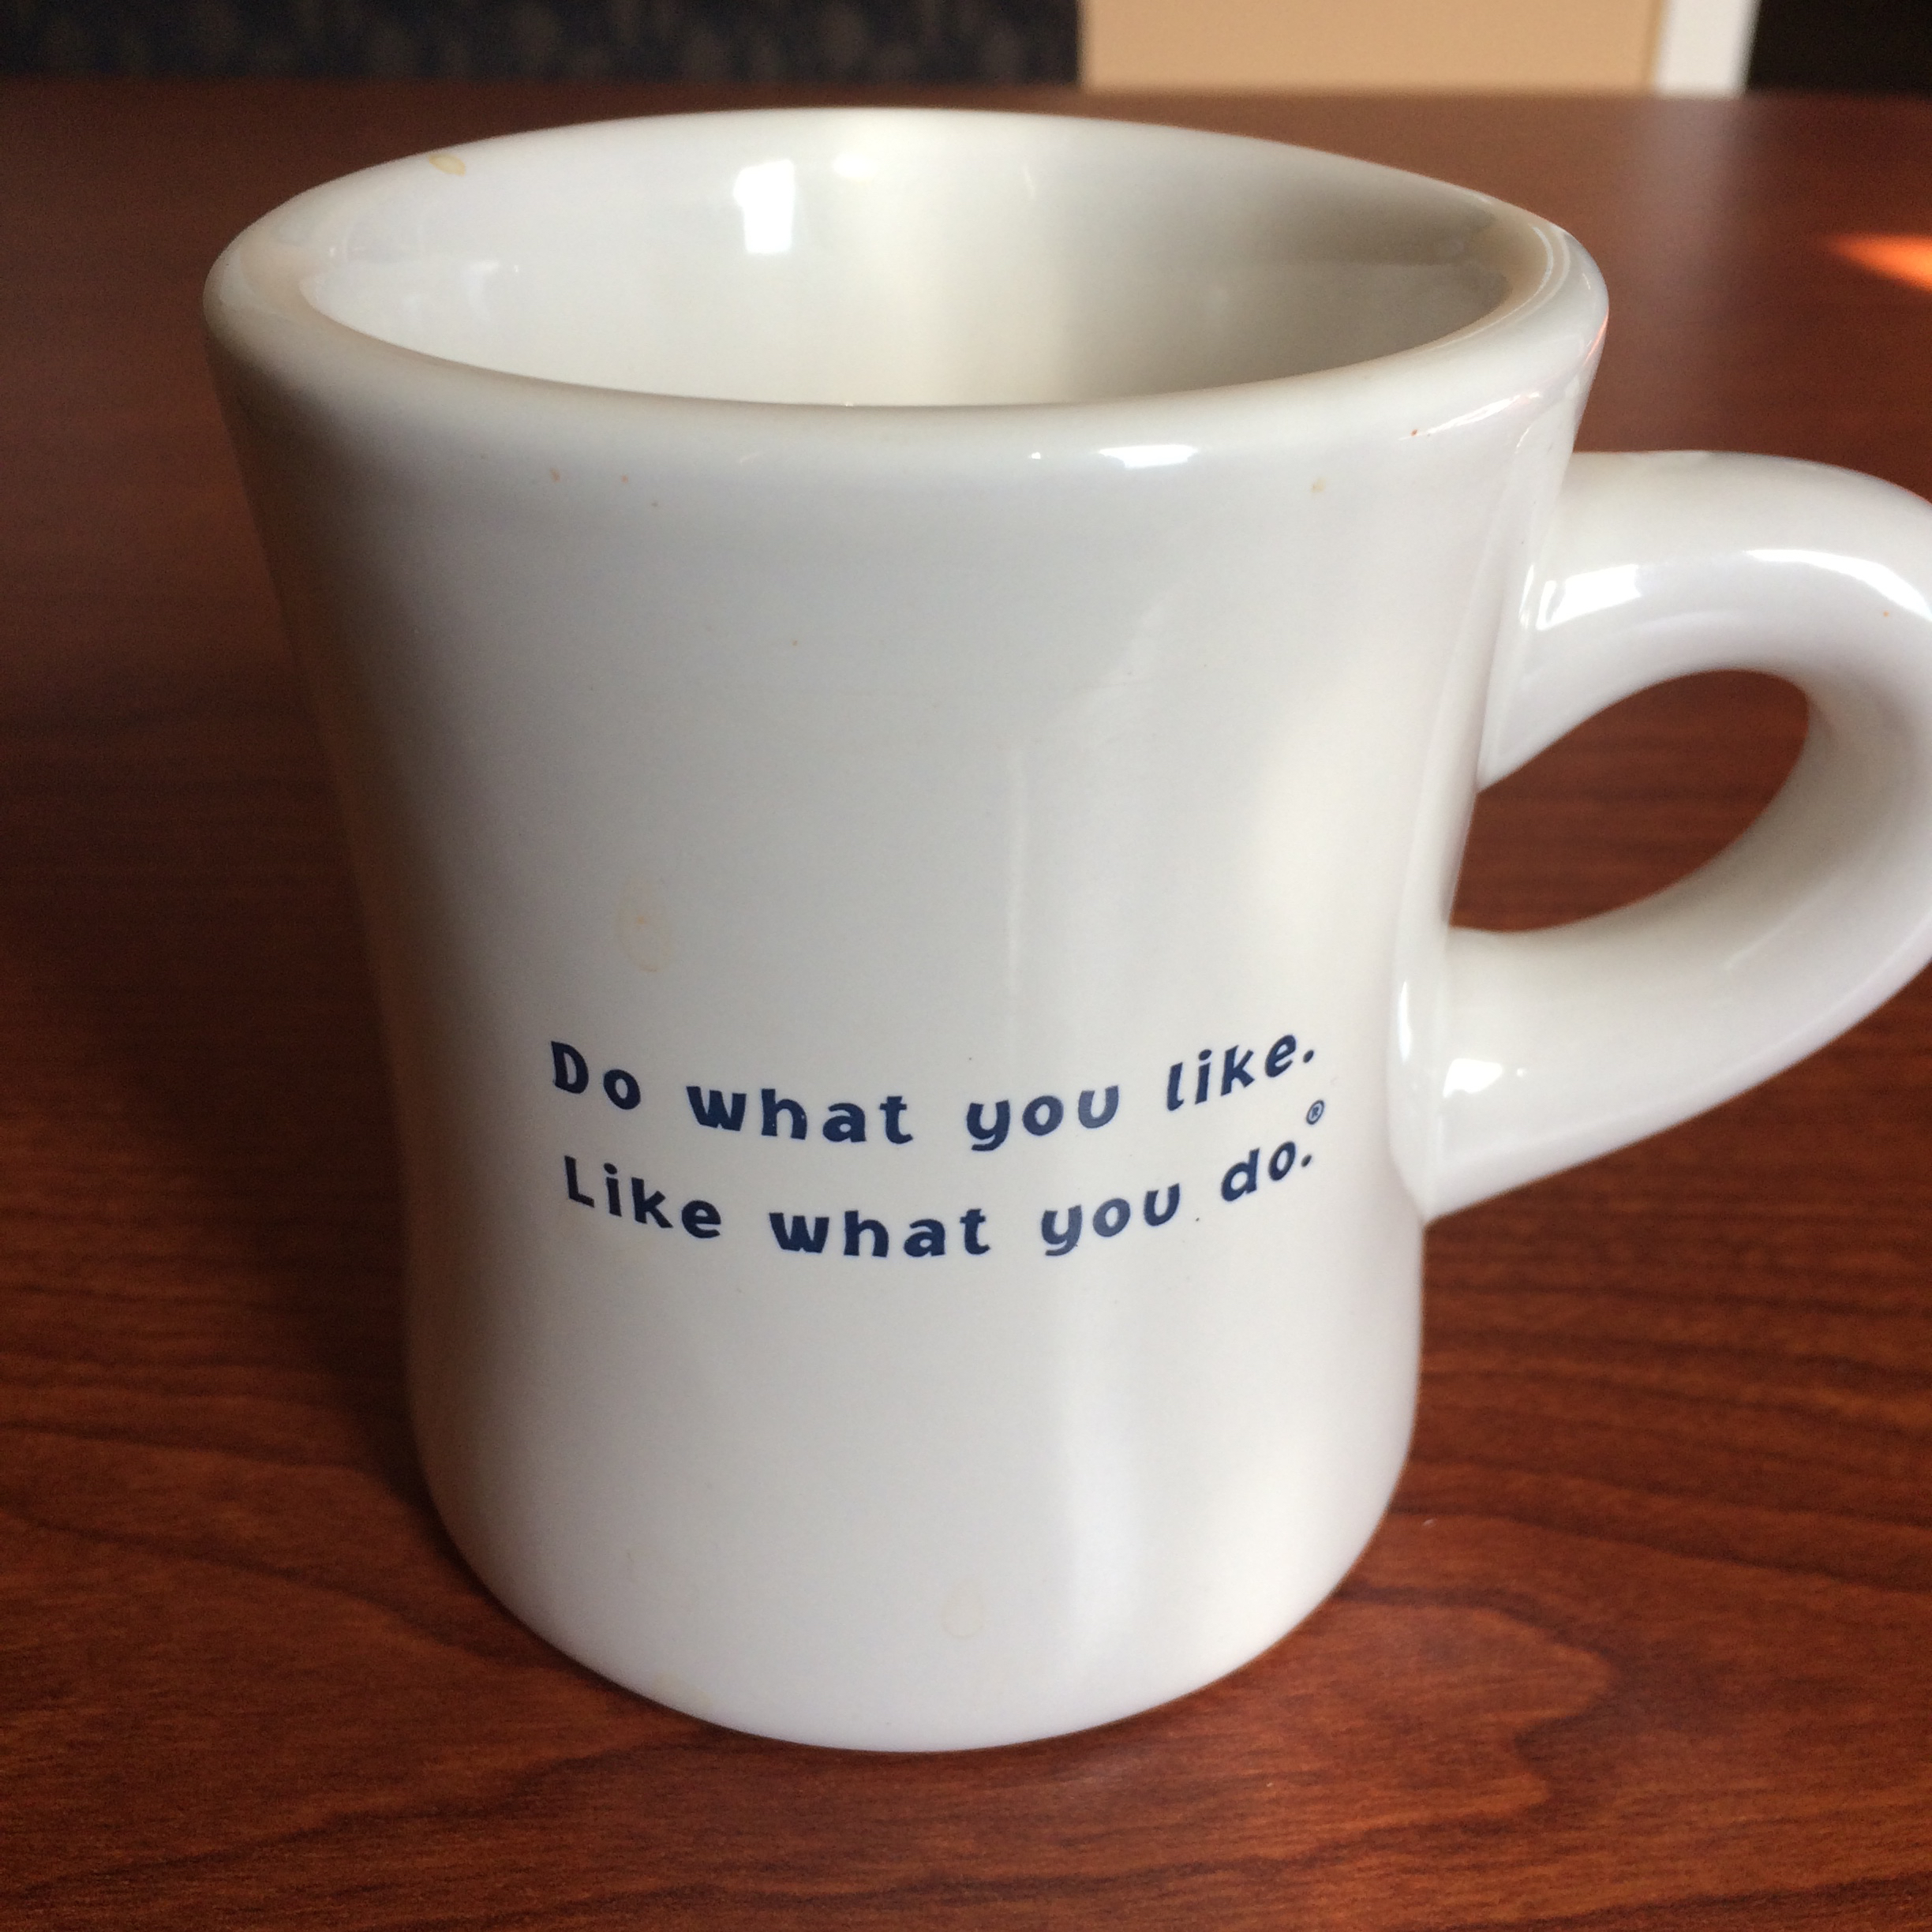 A VP of Sales gave me this mug years ago and I use it to this day. Concidently, I find myself working with him again 10 years later 